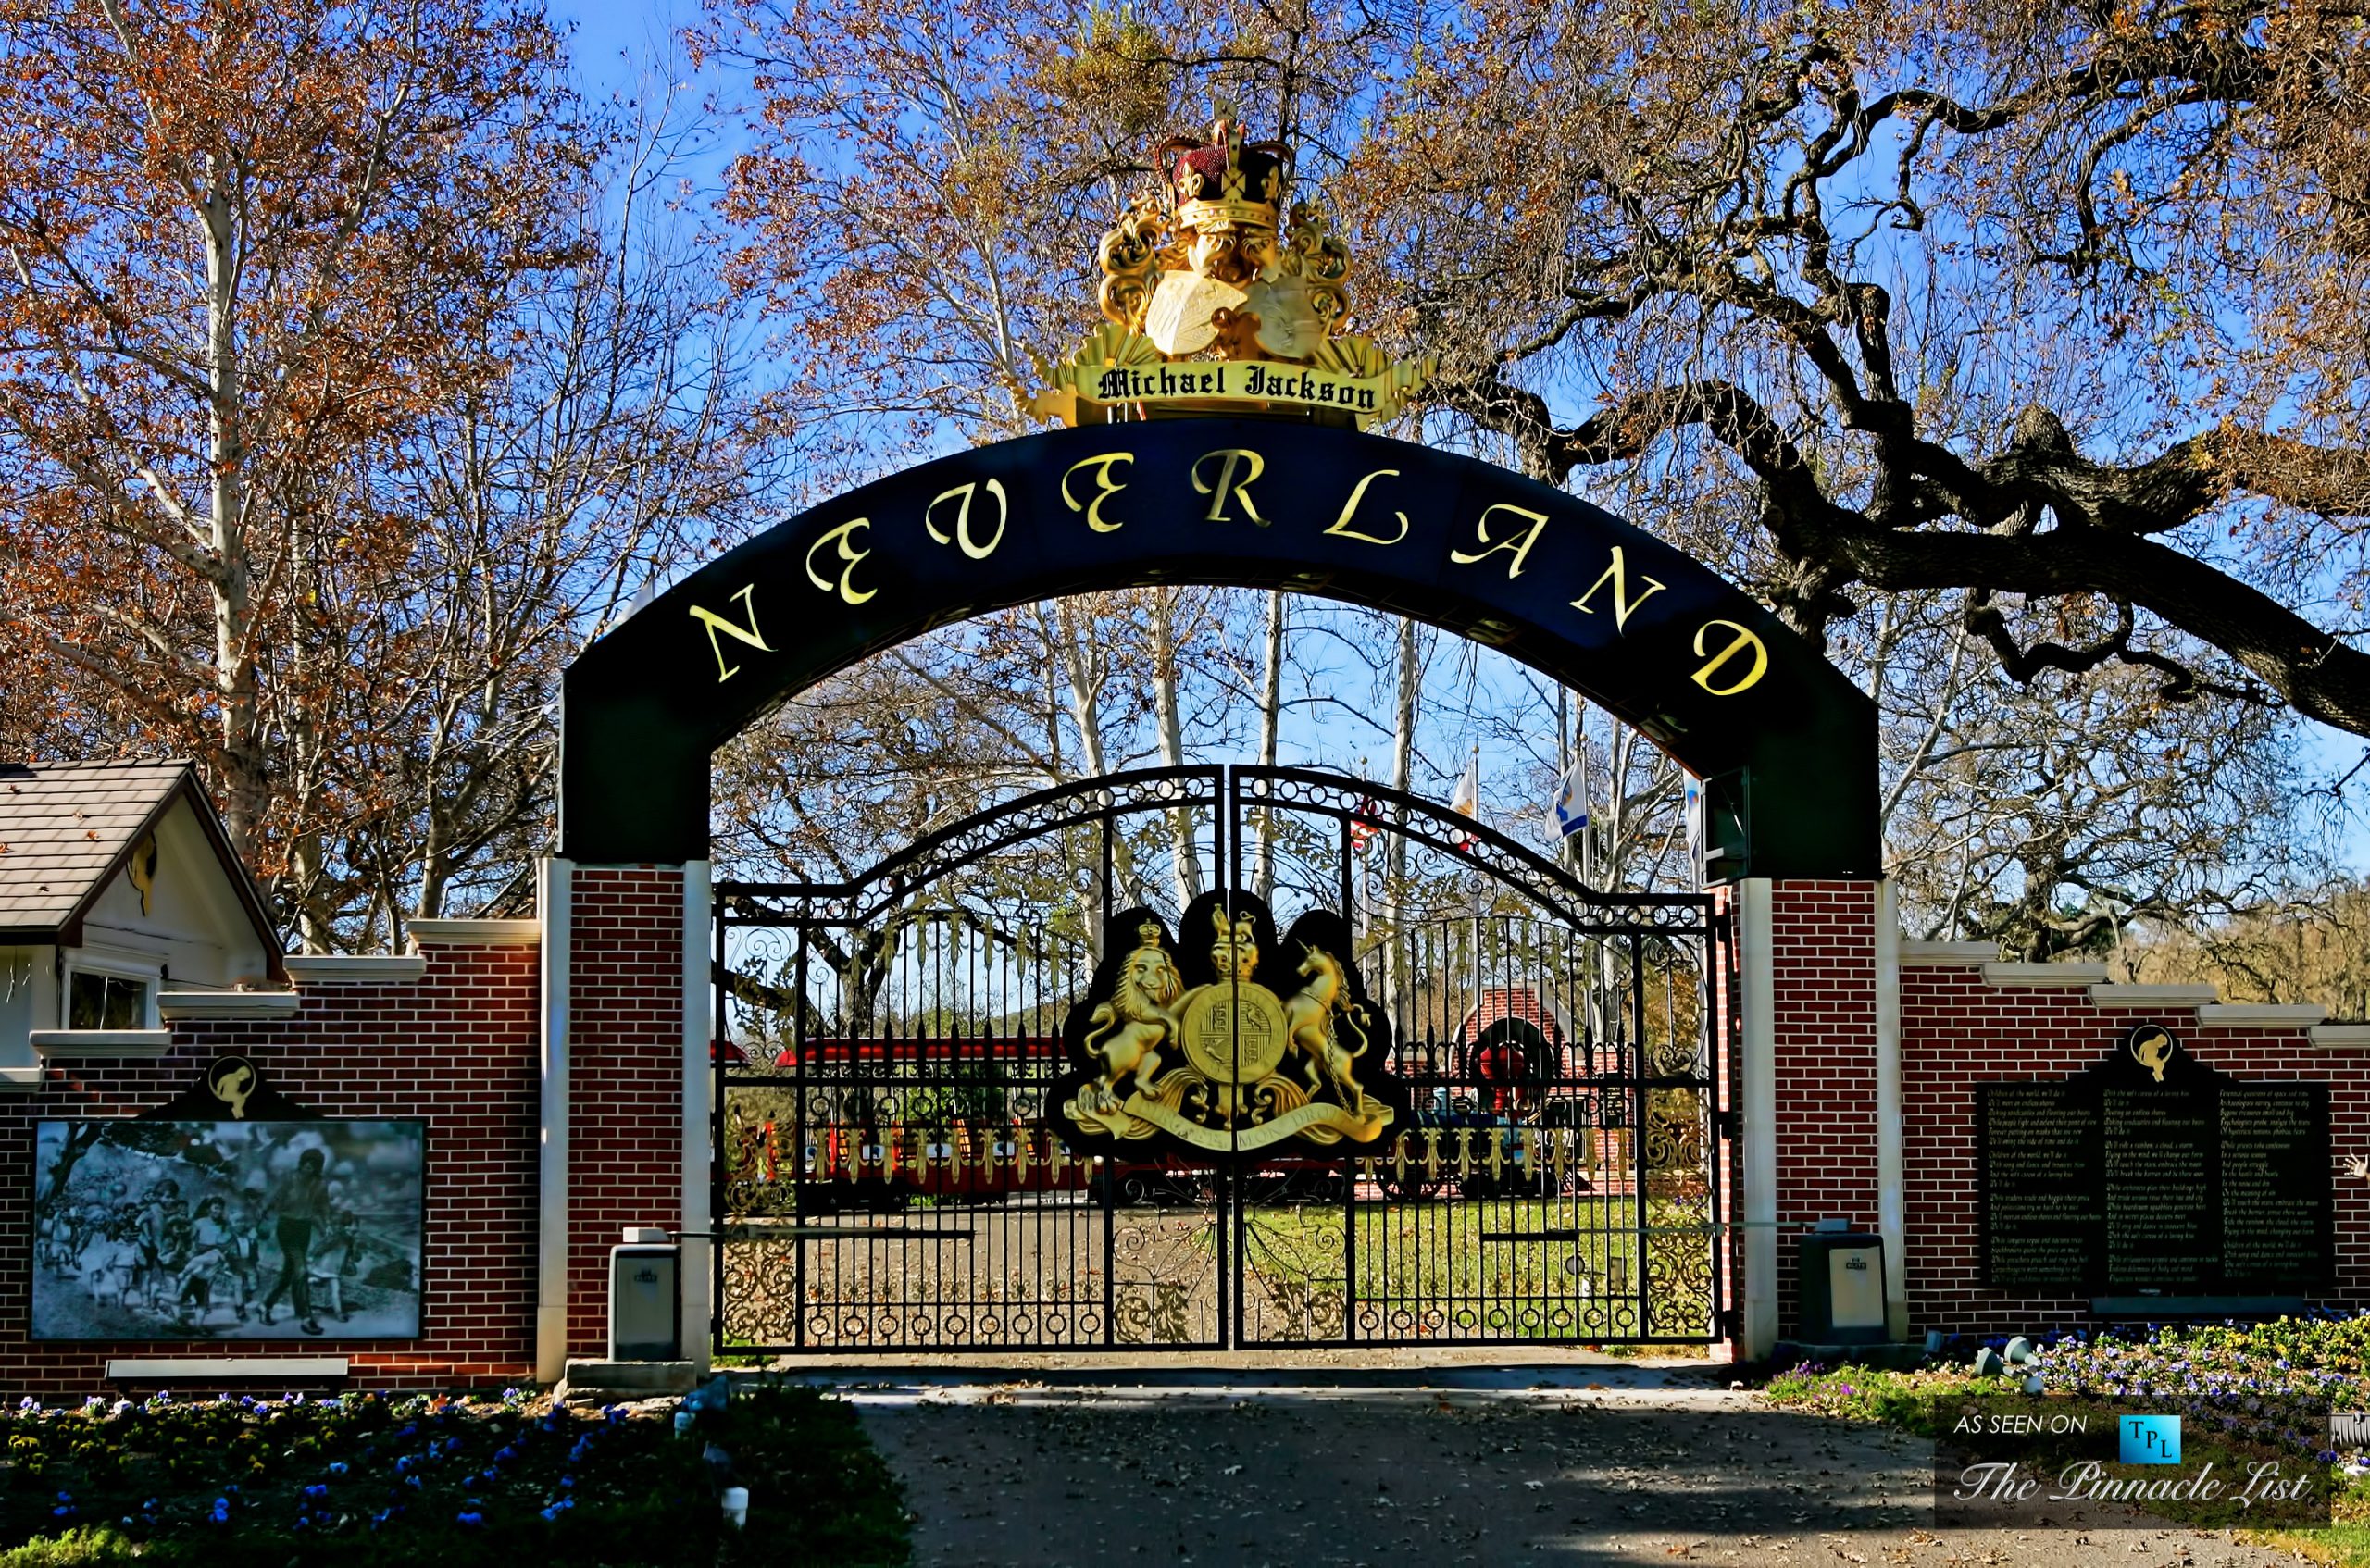 Michael Jackson's Famed Neverland Valley Ranch Listed For Sale at $100 Million